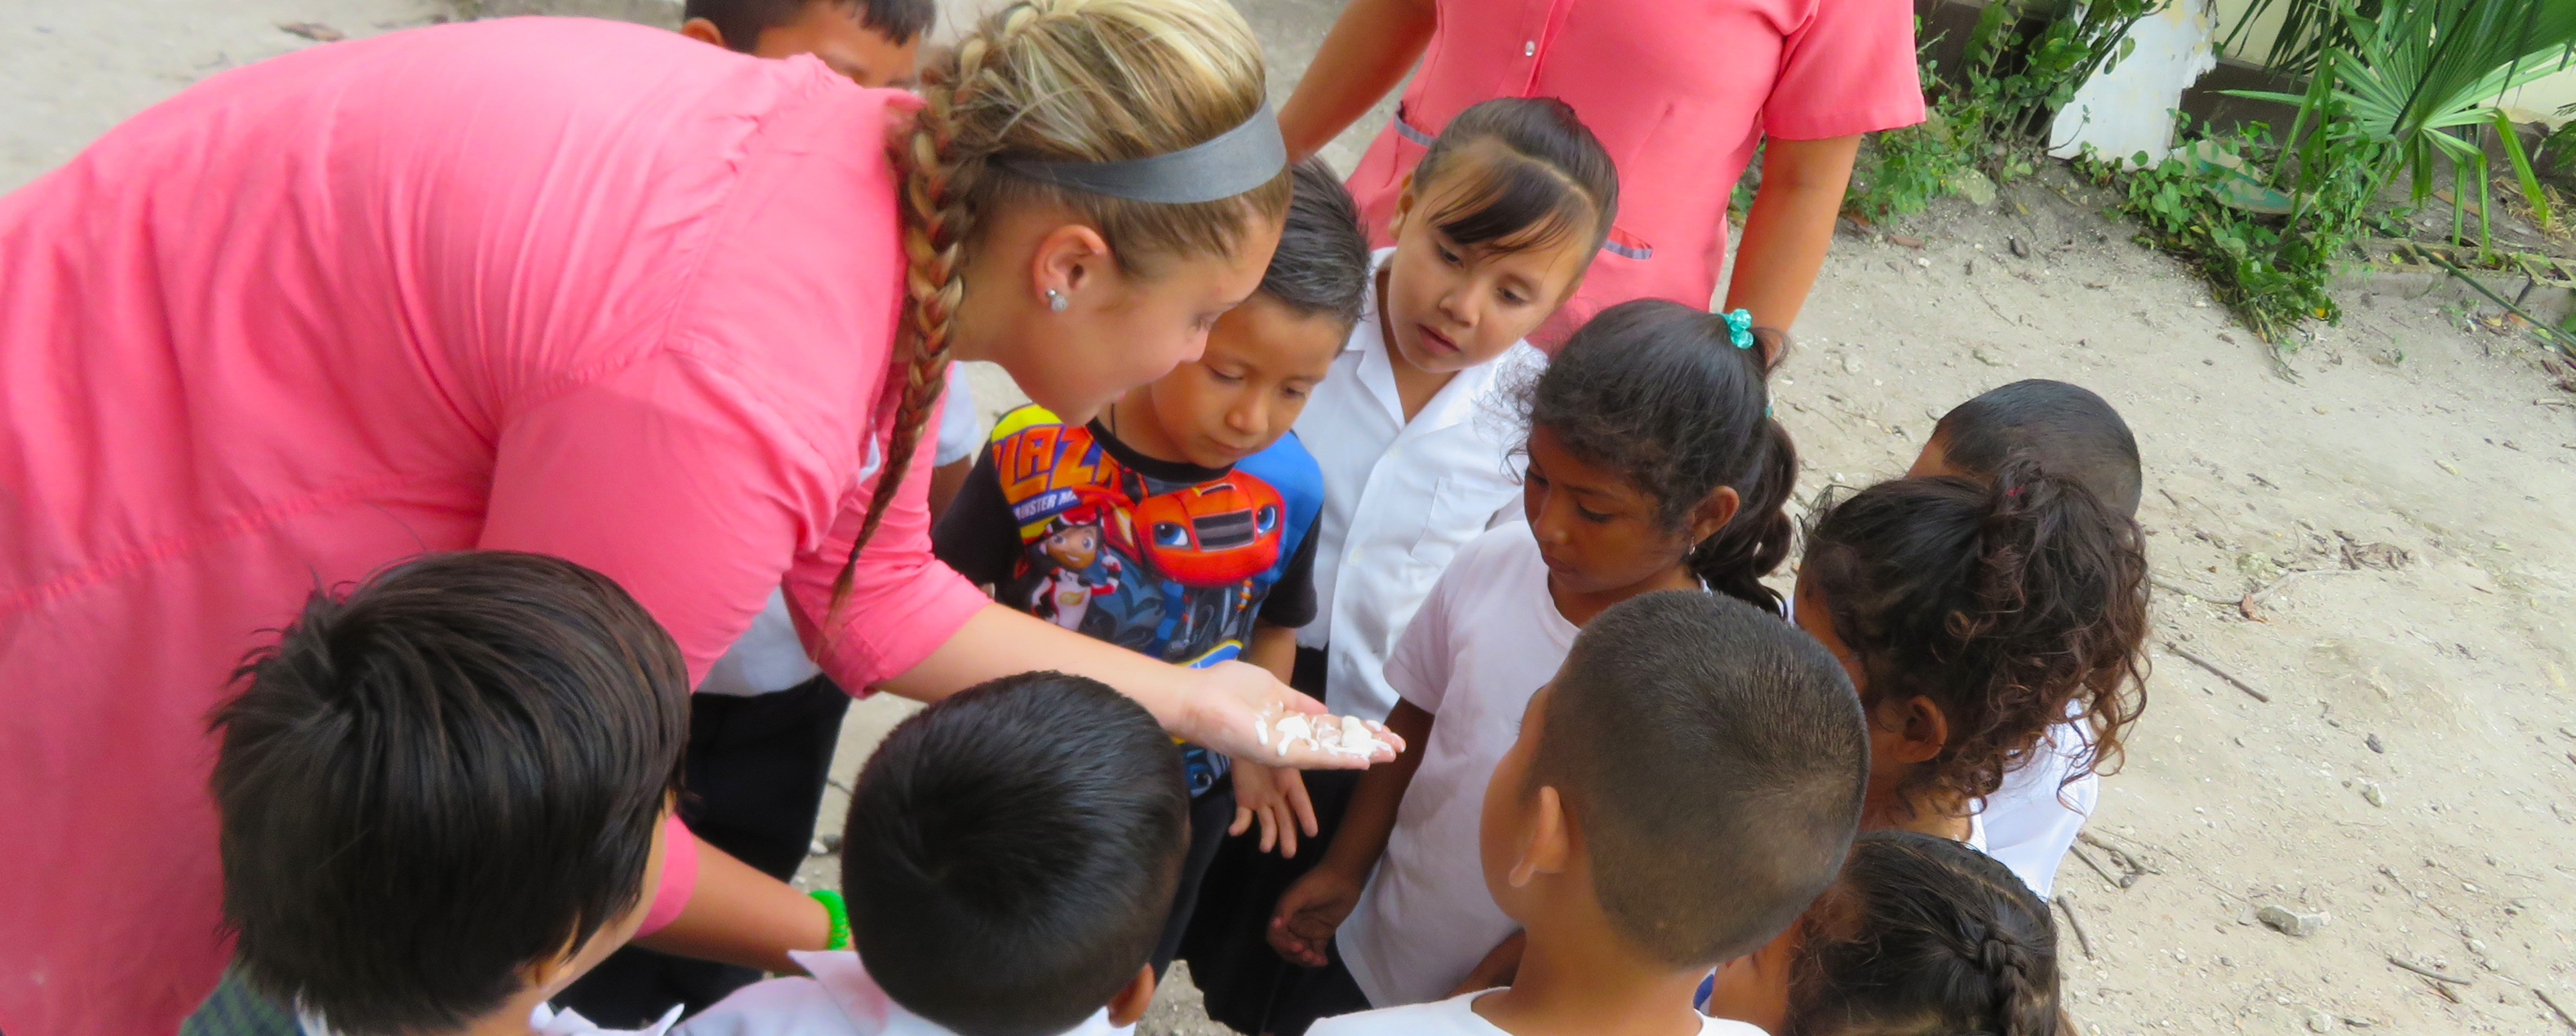 Blonde student surrounded by ten small children who are looking at a light colored substance on her palm which she is holding out.